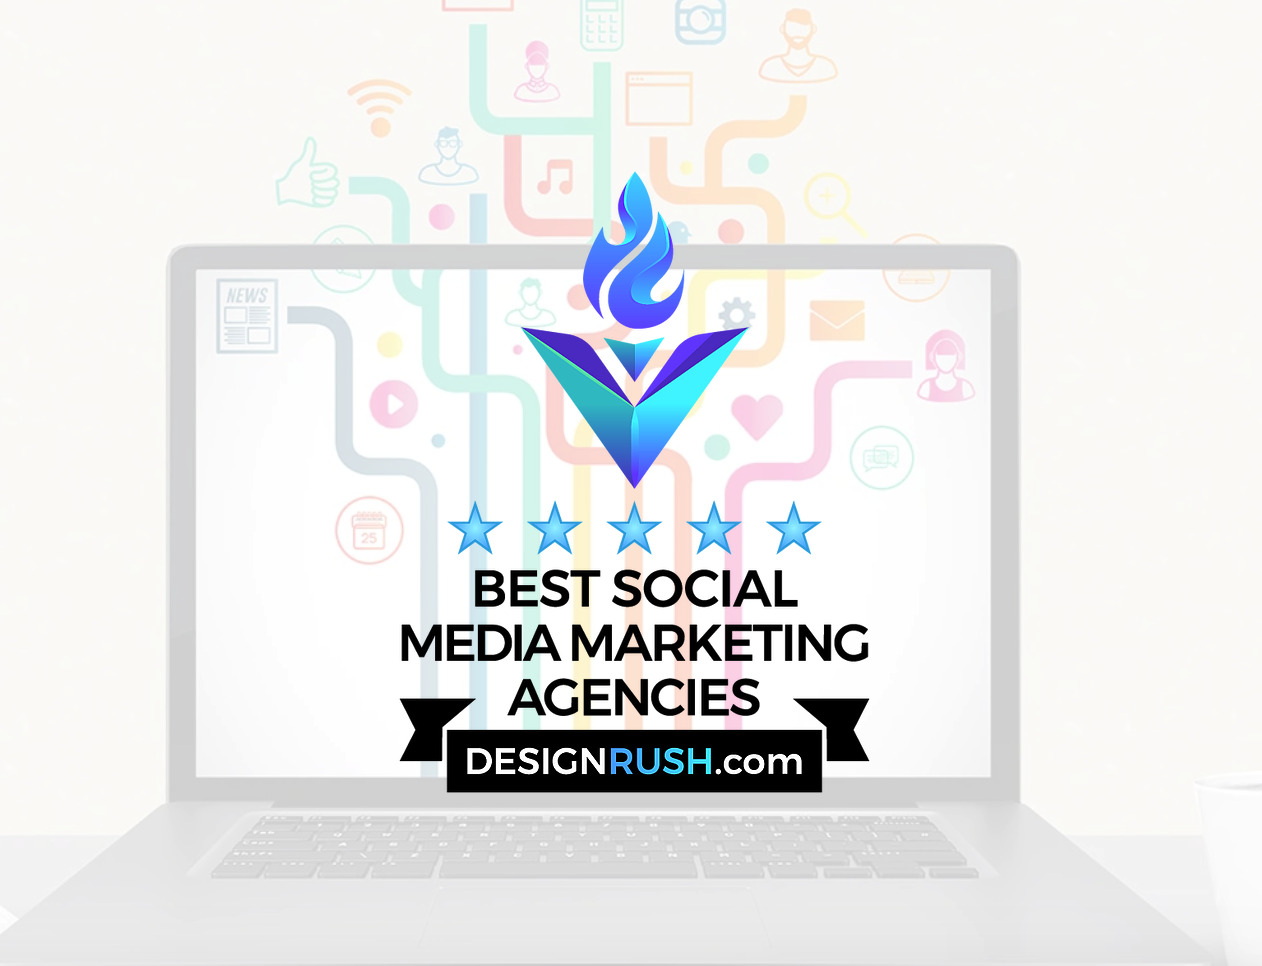 Awards won by Karben Marketing are "Best Web Developers in Aurora 2021" by Expertise.com and "Best Digital Marketing Agencies" by DesignRush.com.